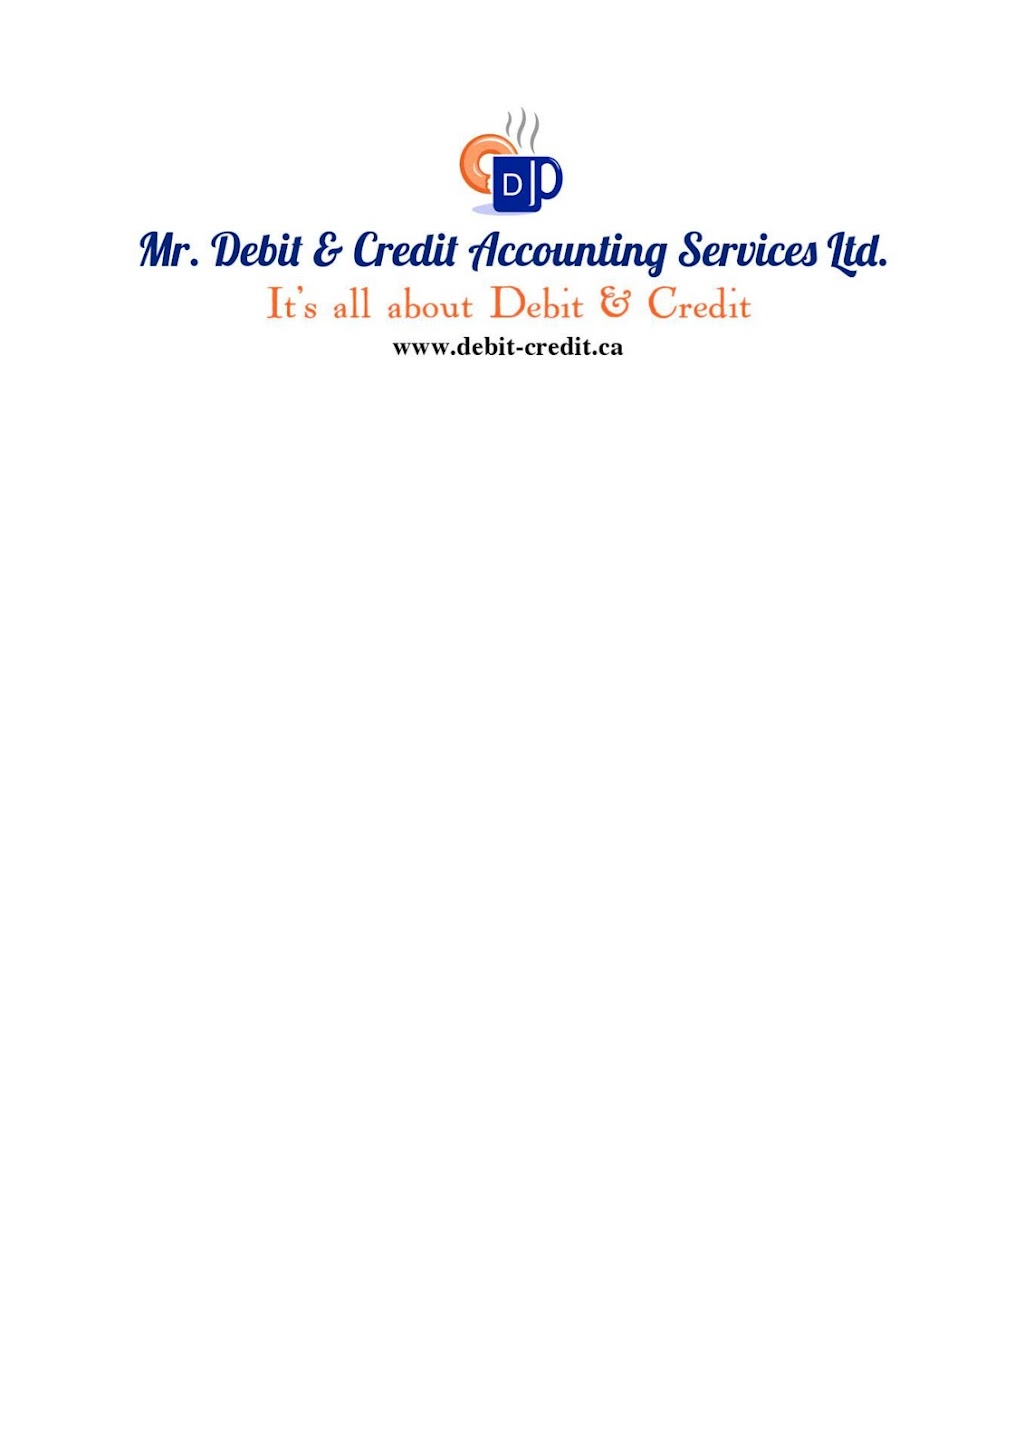 Mr Debit & Credit Accounting Services Ltd | 7404 King George Blvd Suite 200, Surrey, BC V3W 1N6, Canada | Phone: (604) 505-1750